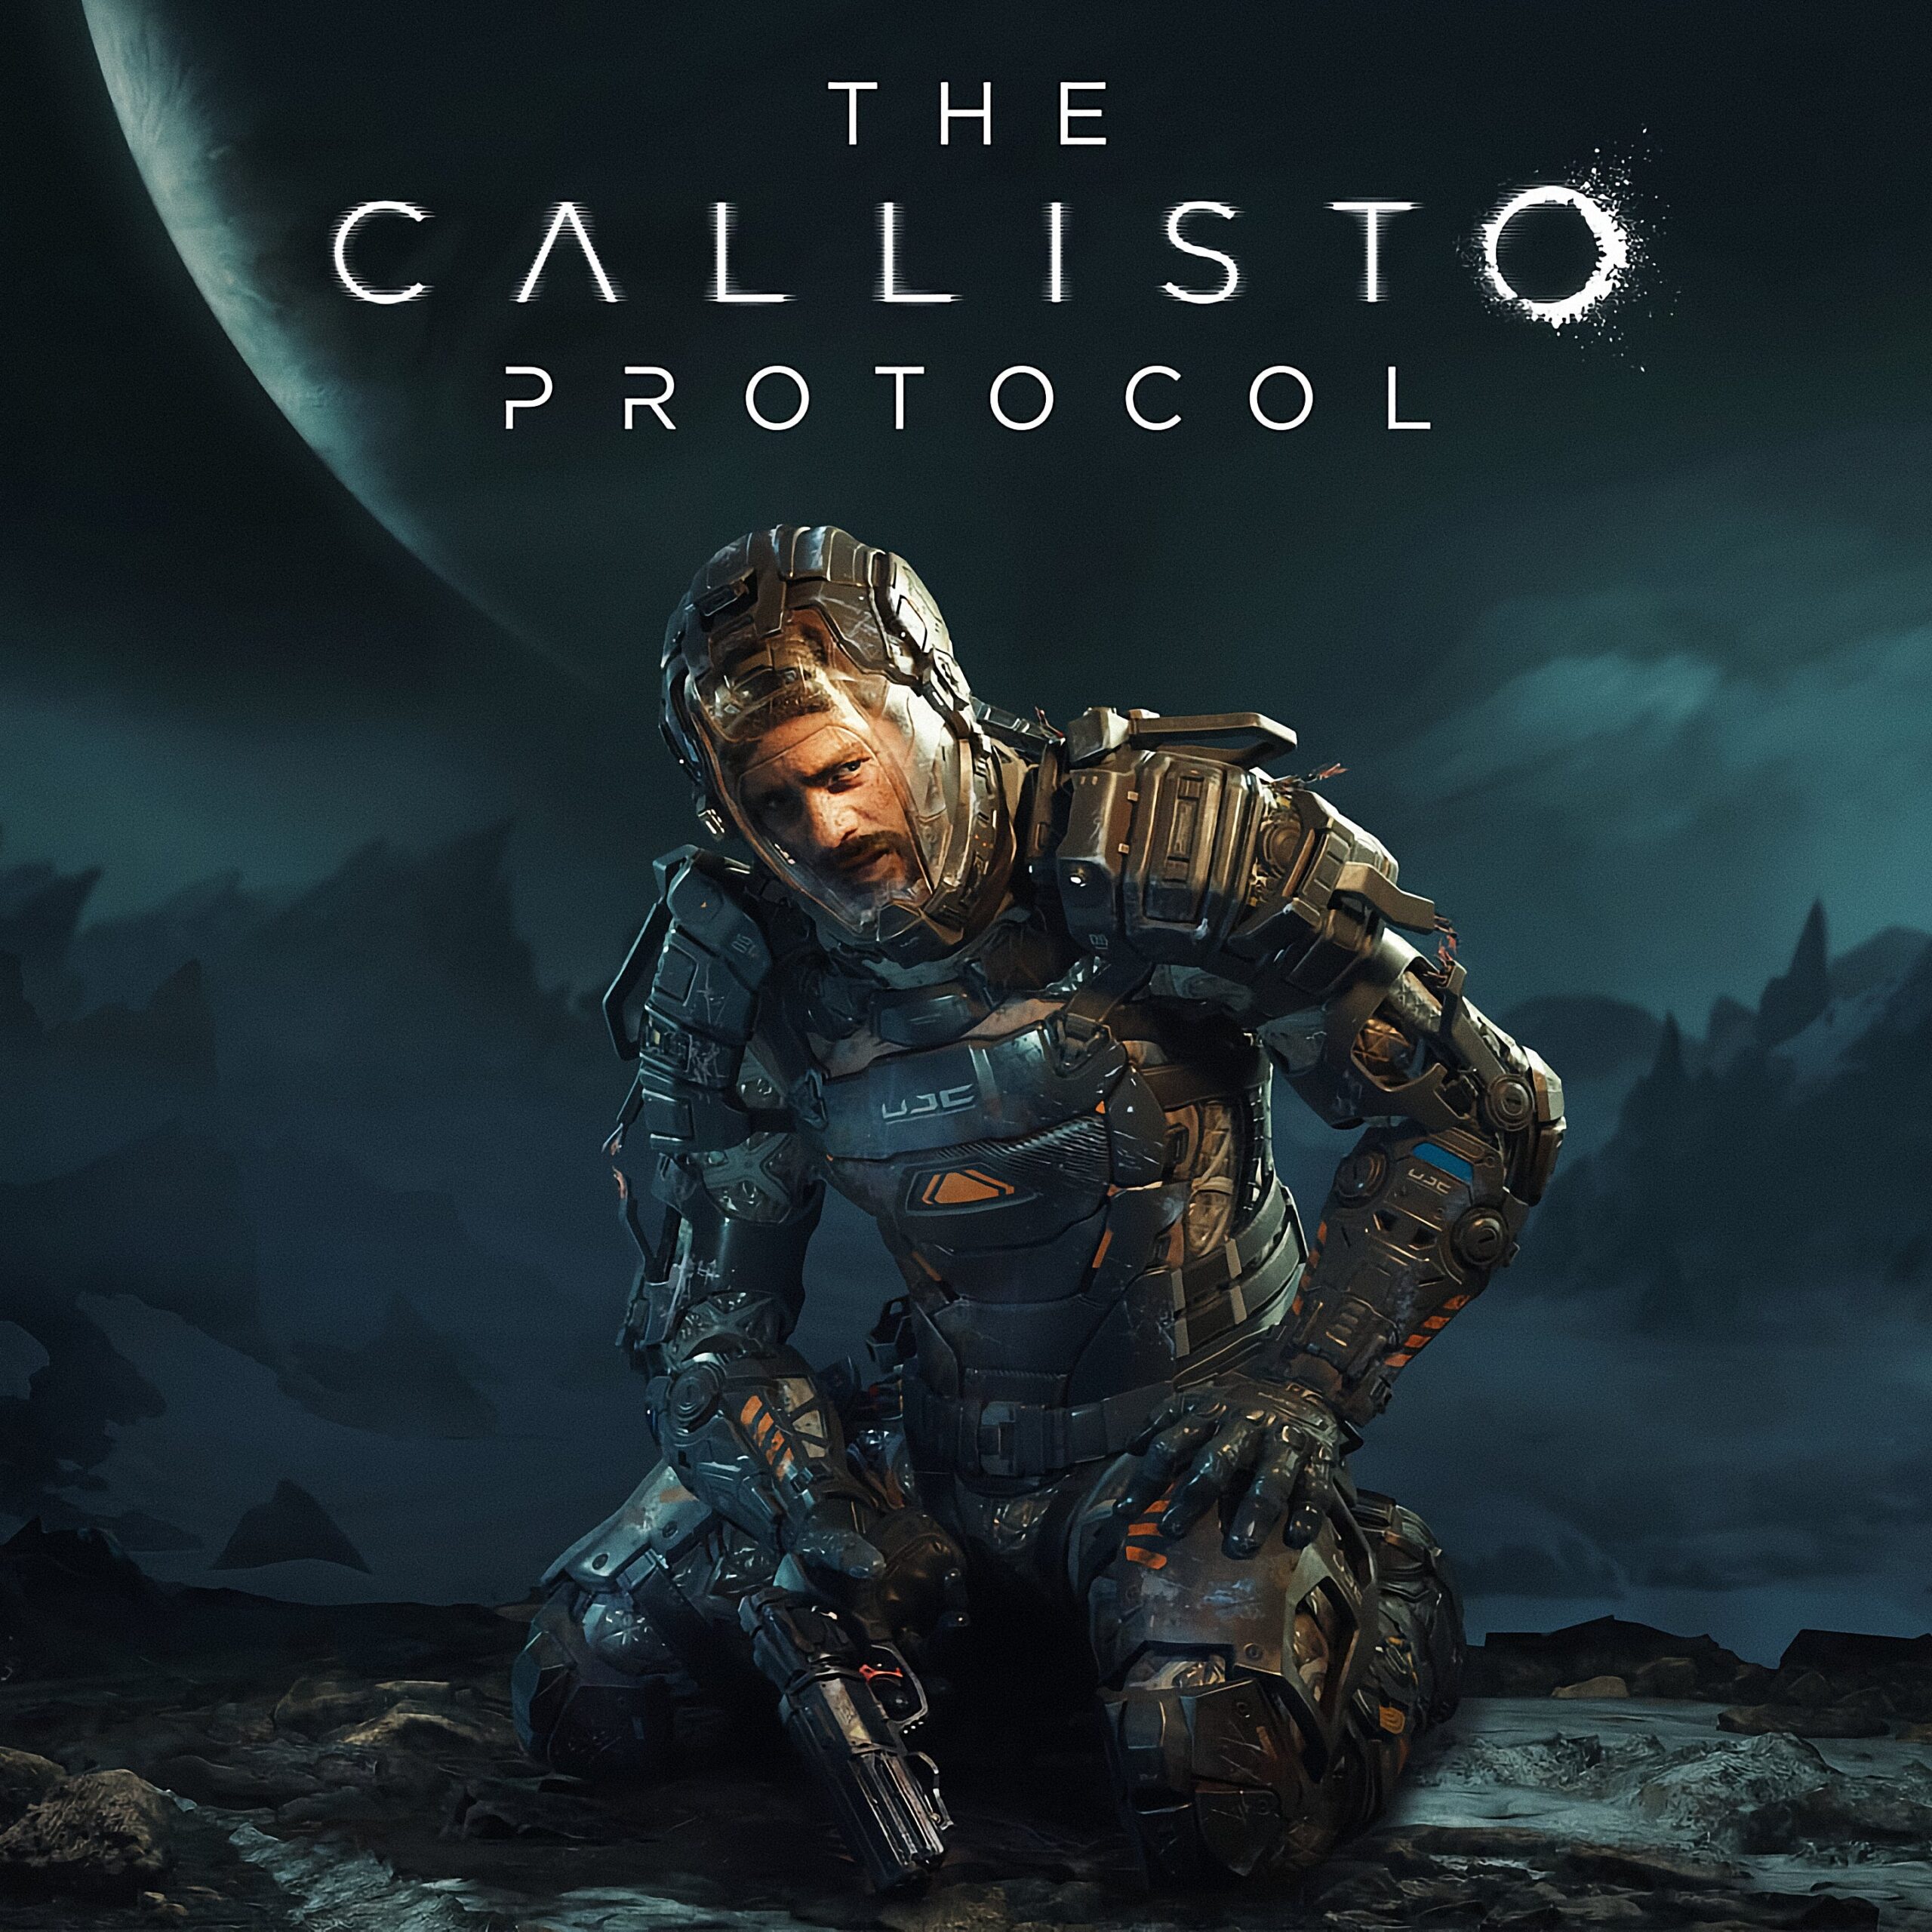 The Callisto Protocol – What you need to know about the game